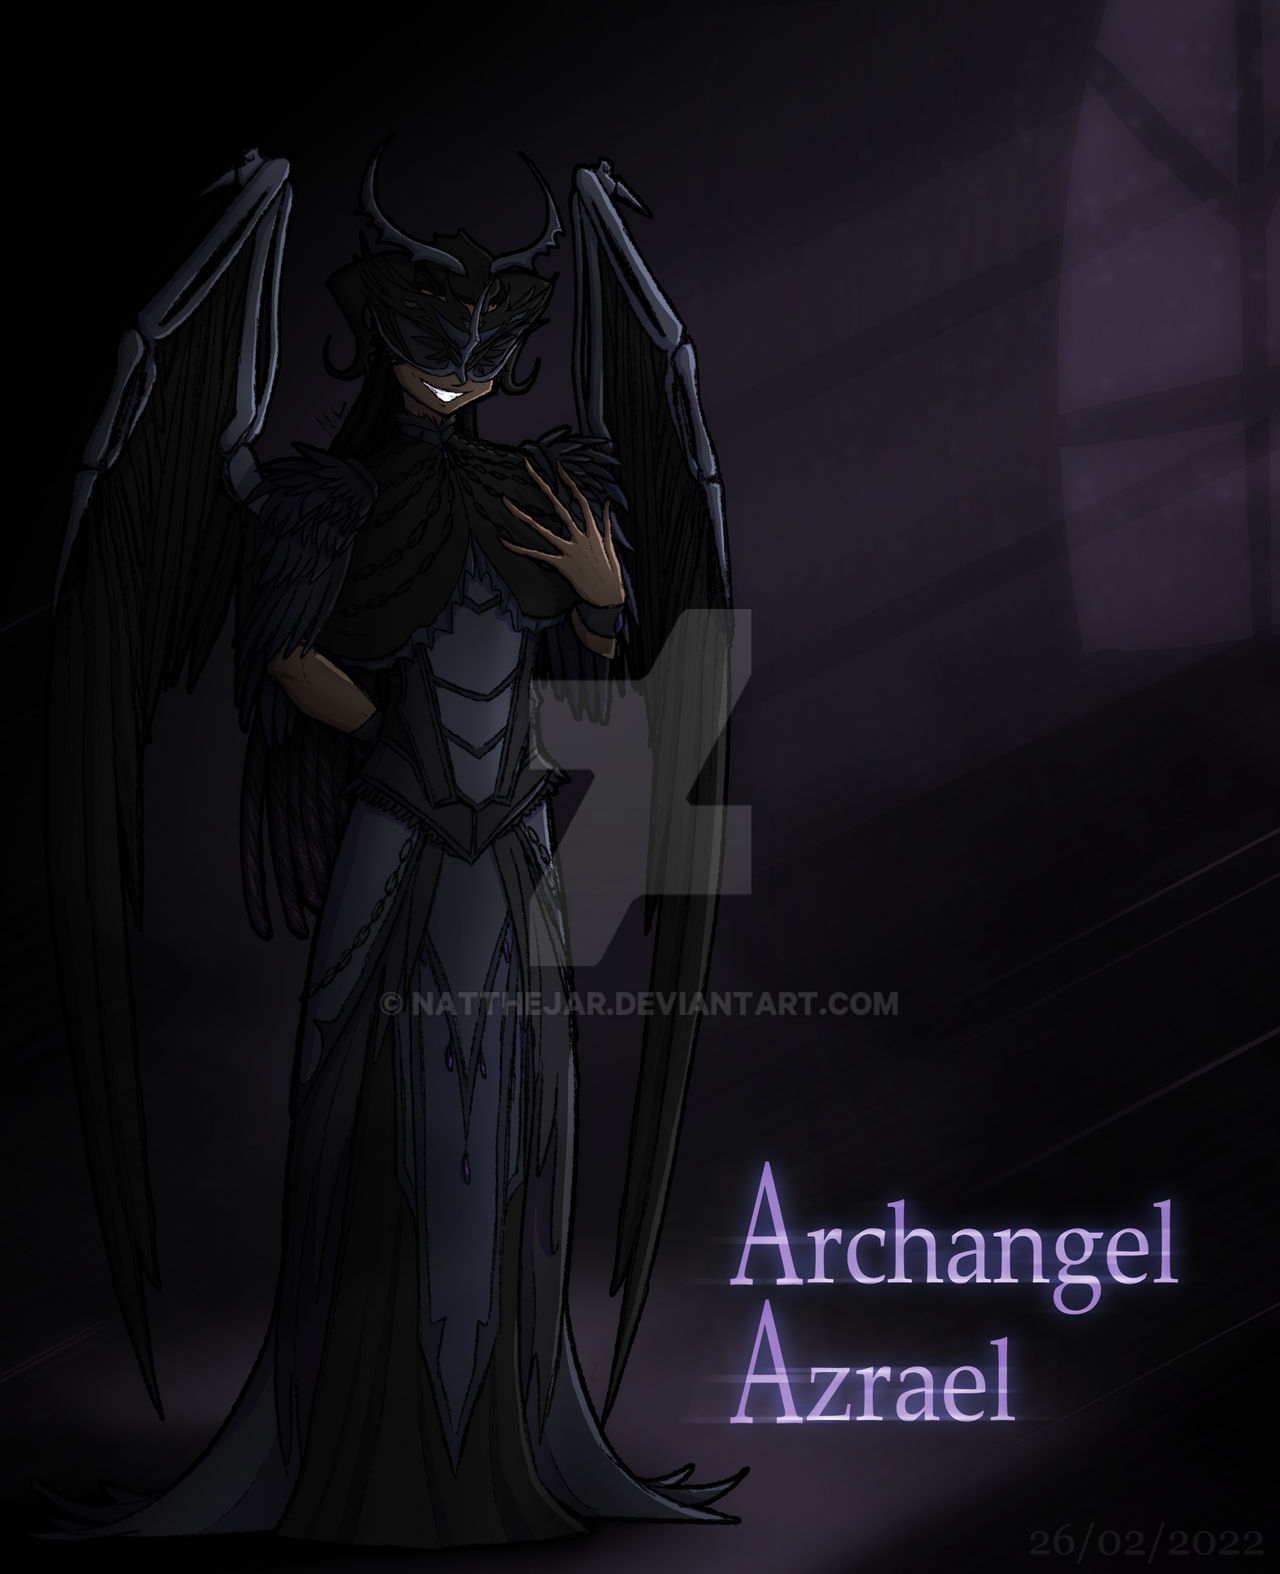 Azrael: The Angel of Death and the All-Seer